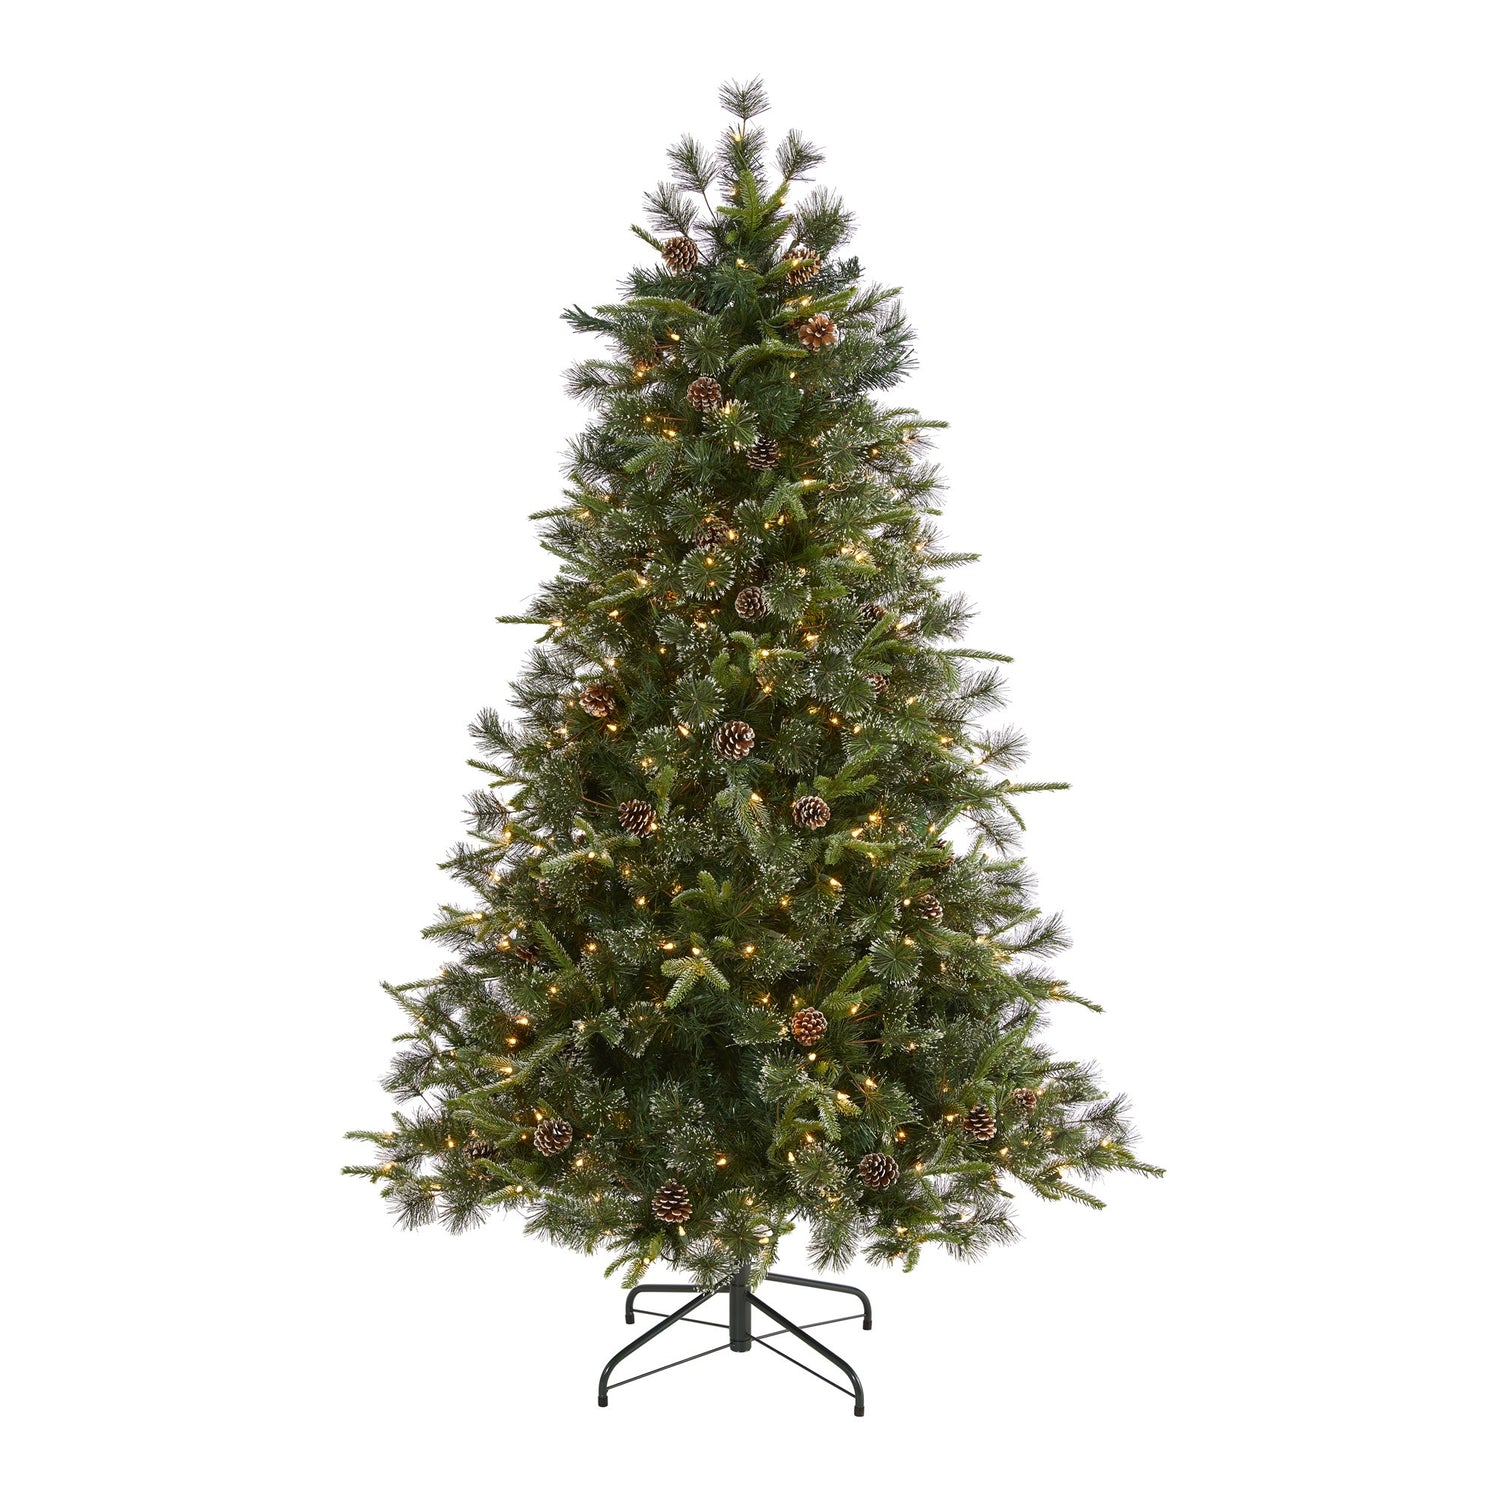 6’ Snowed Tipped Clermont Mixed Pine Artificial Christmas Tree with 250 Clear LED Lights, Pine Cones and 1242 Bendable Branches